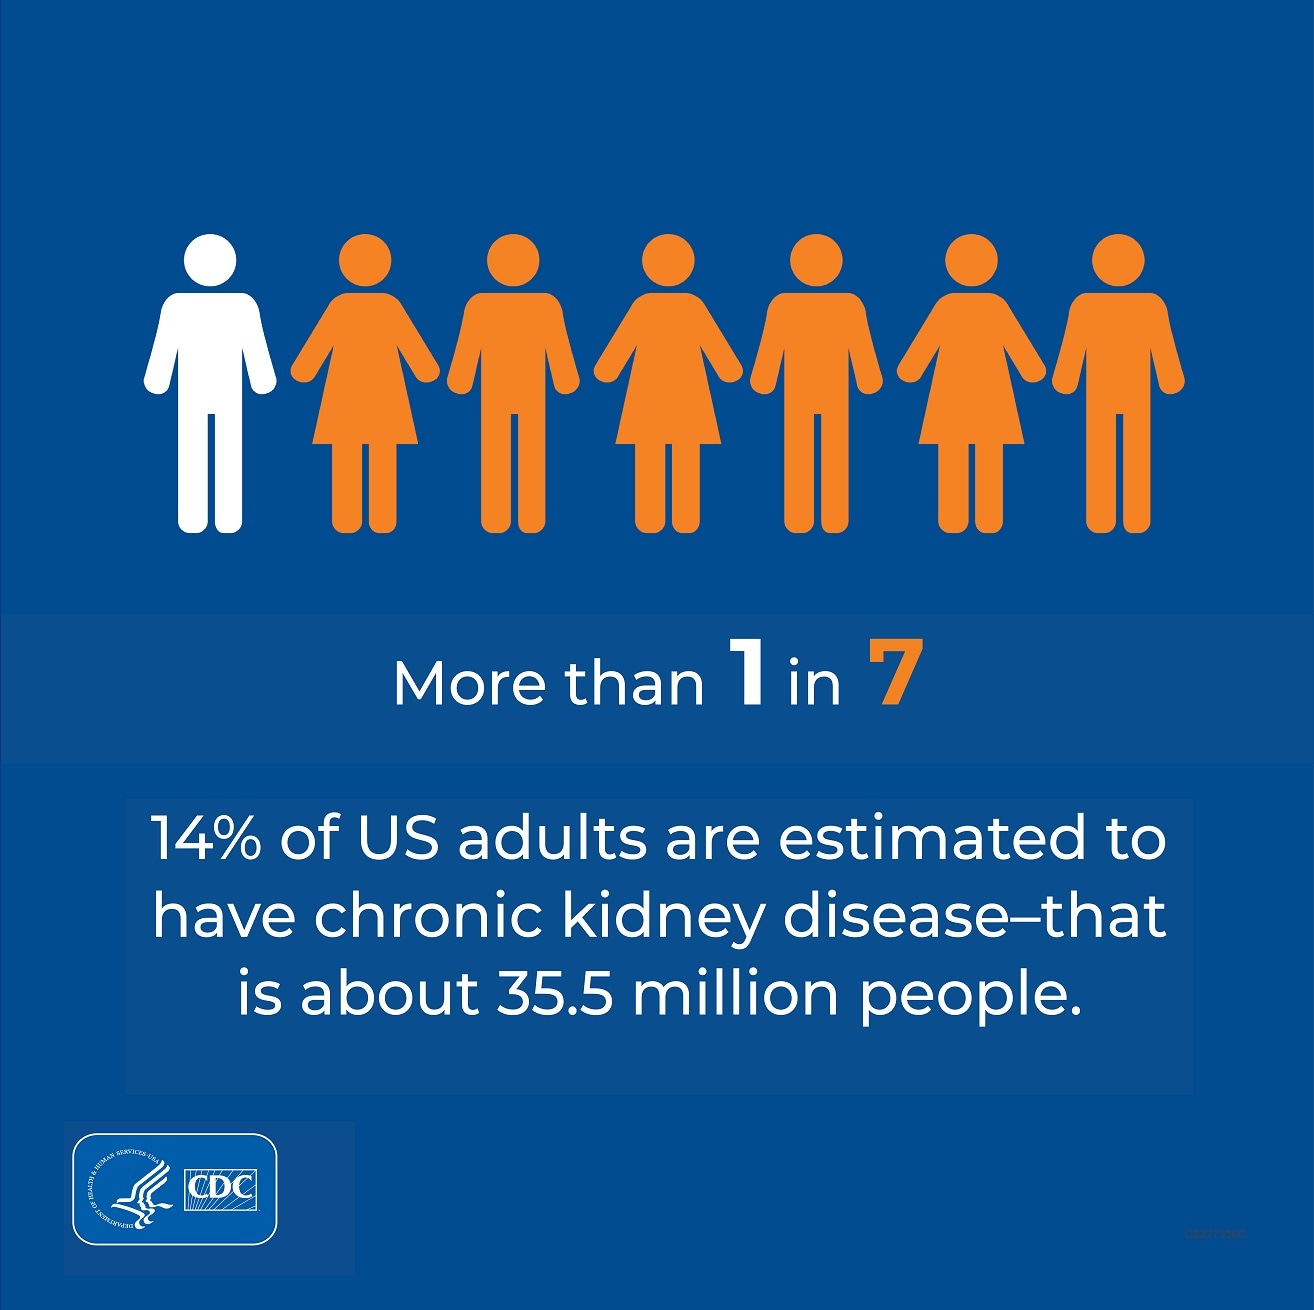 15%26#37; of US adults are estimated to have chronic kidney disease that is about 37 million people